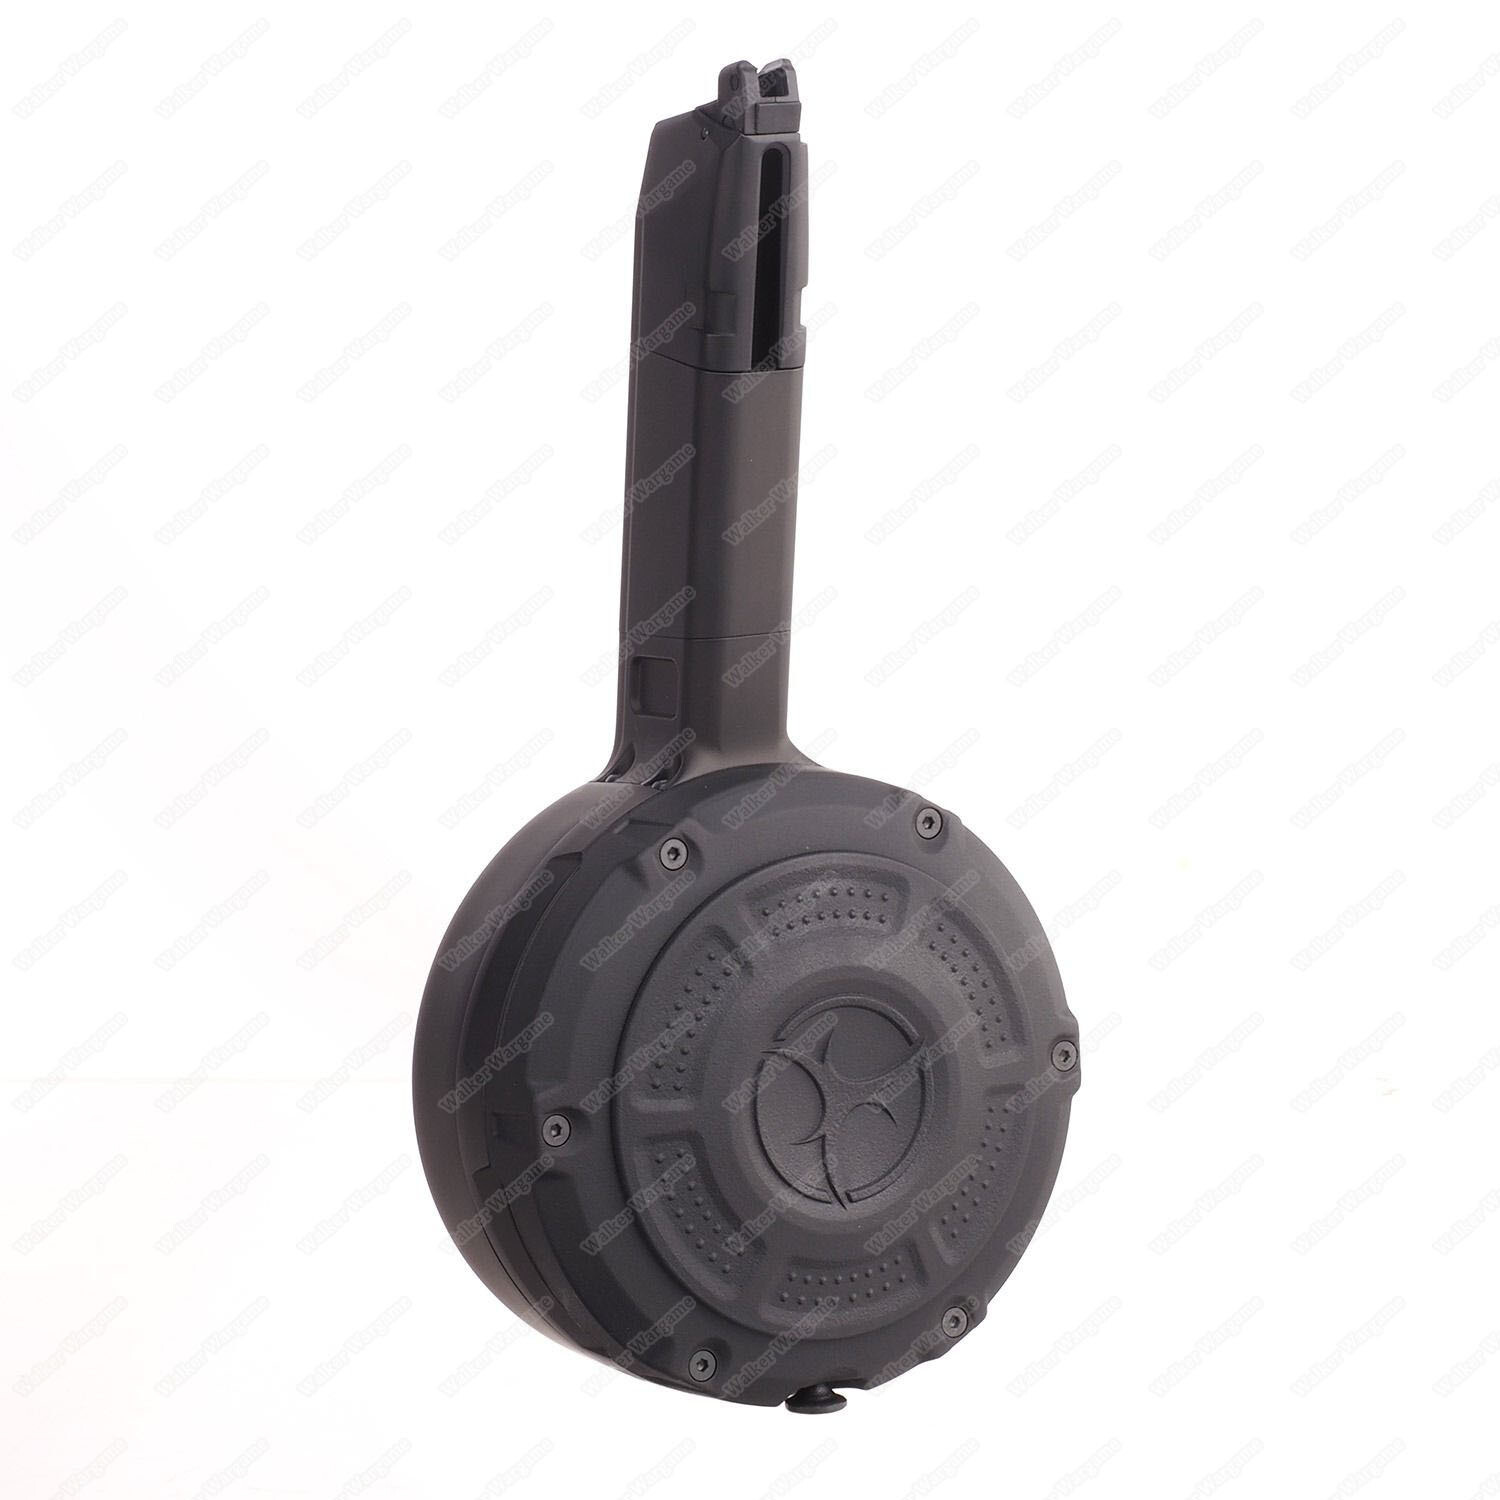 Action Army AAP-01 Fast Reload 350Rds Gas Airsoft Drum Magazine